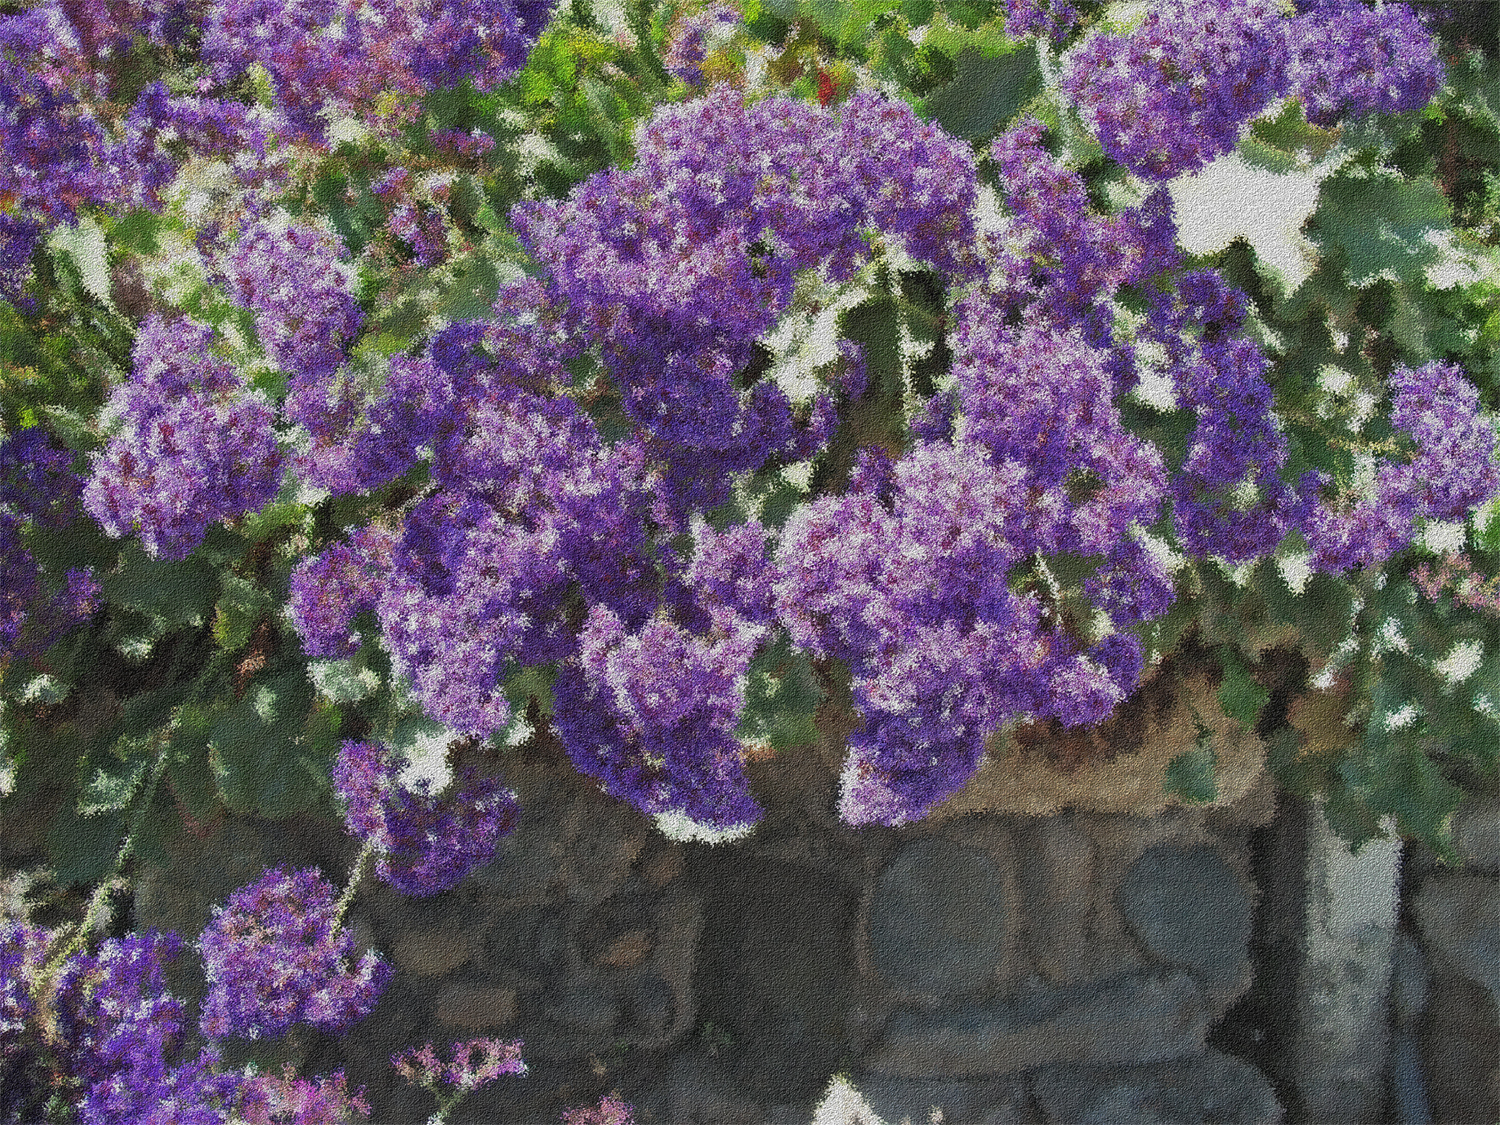 an artistic po of purple flowers blooming over brick wall